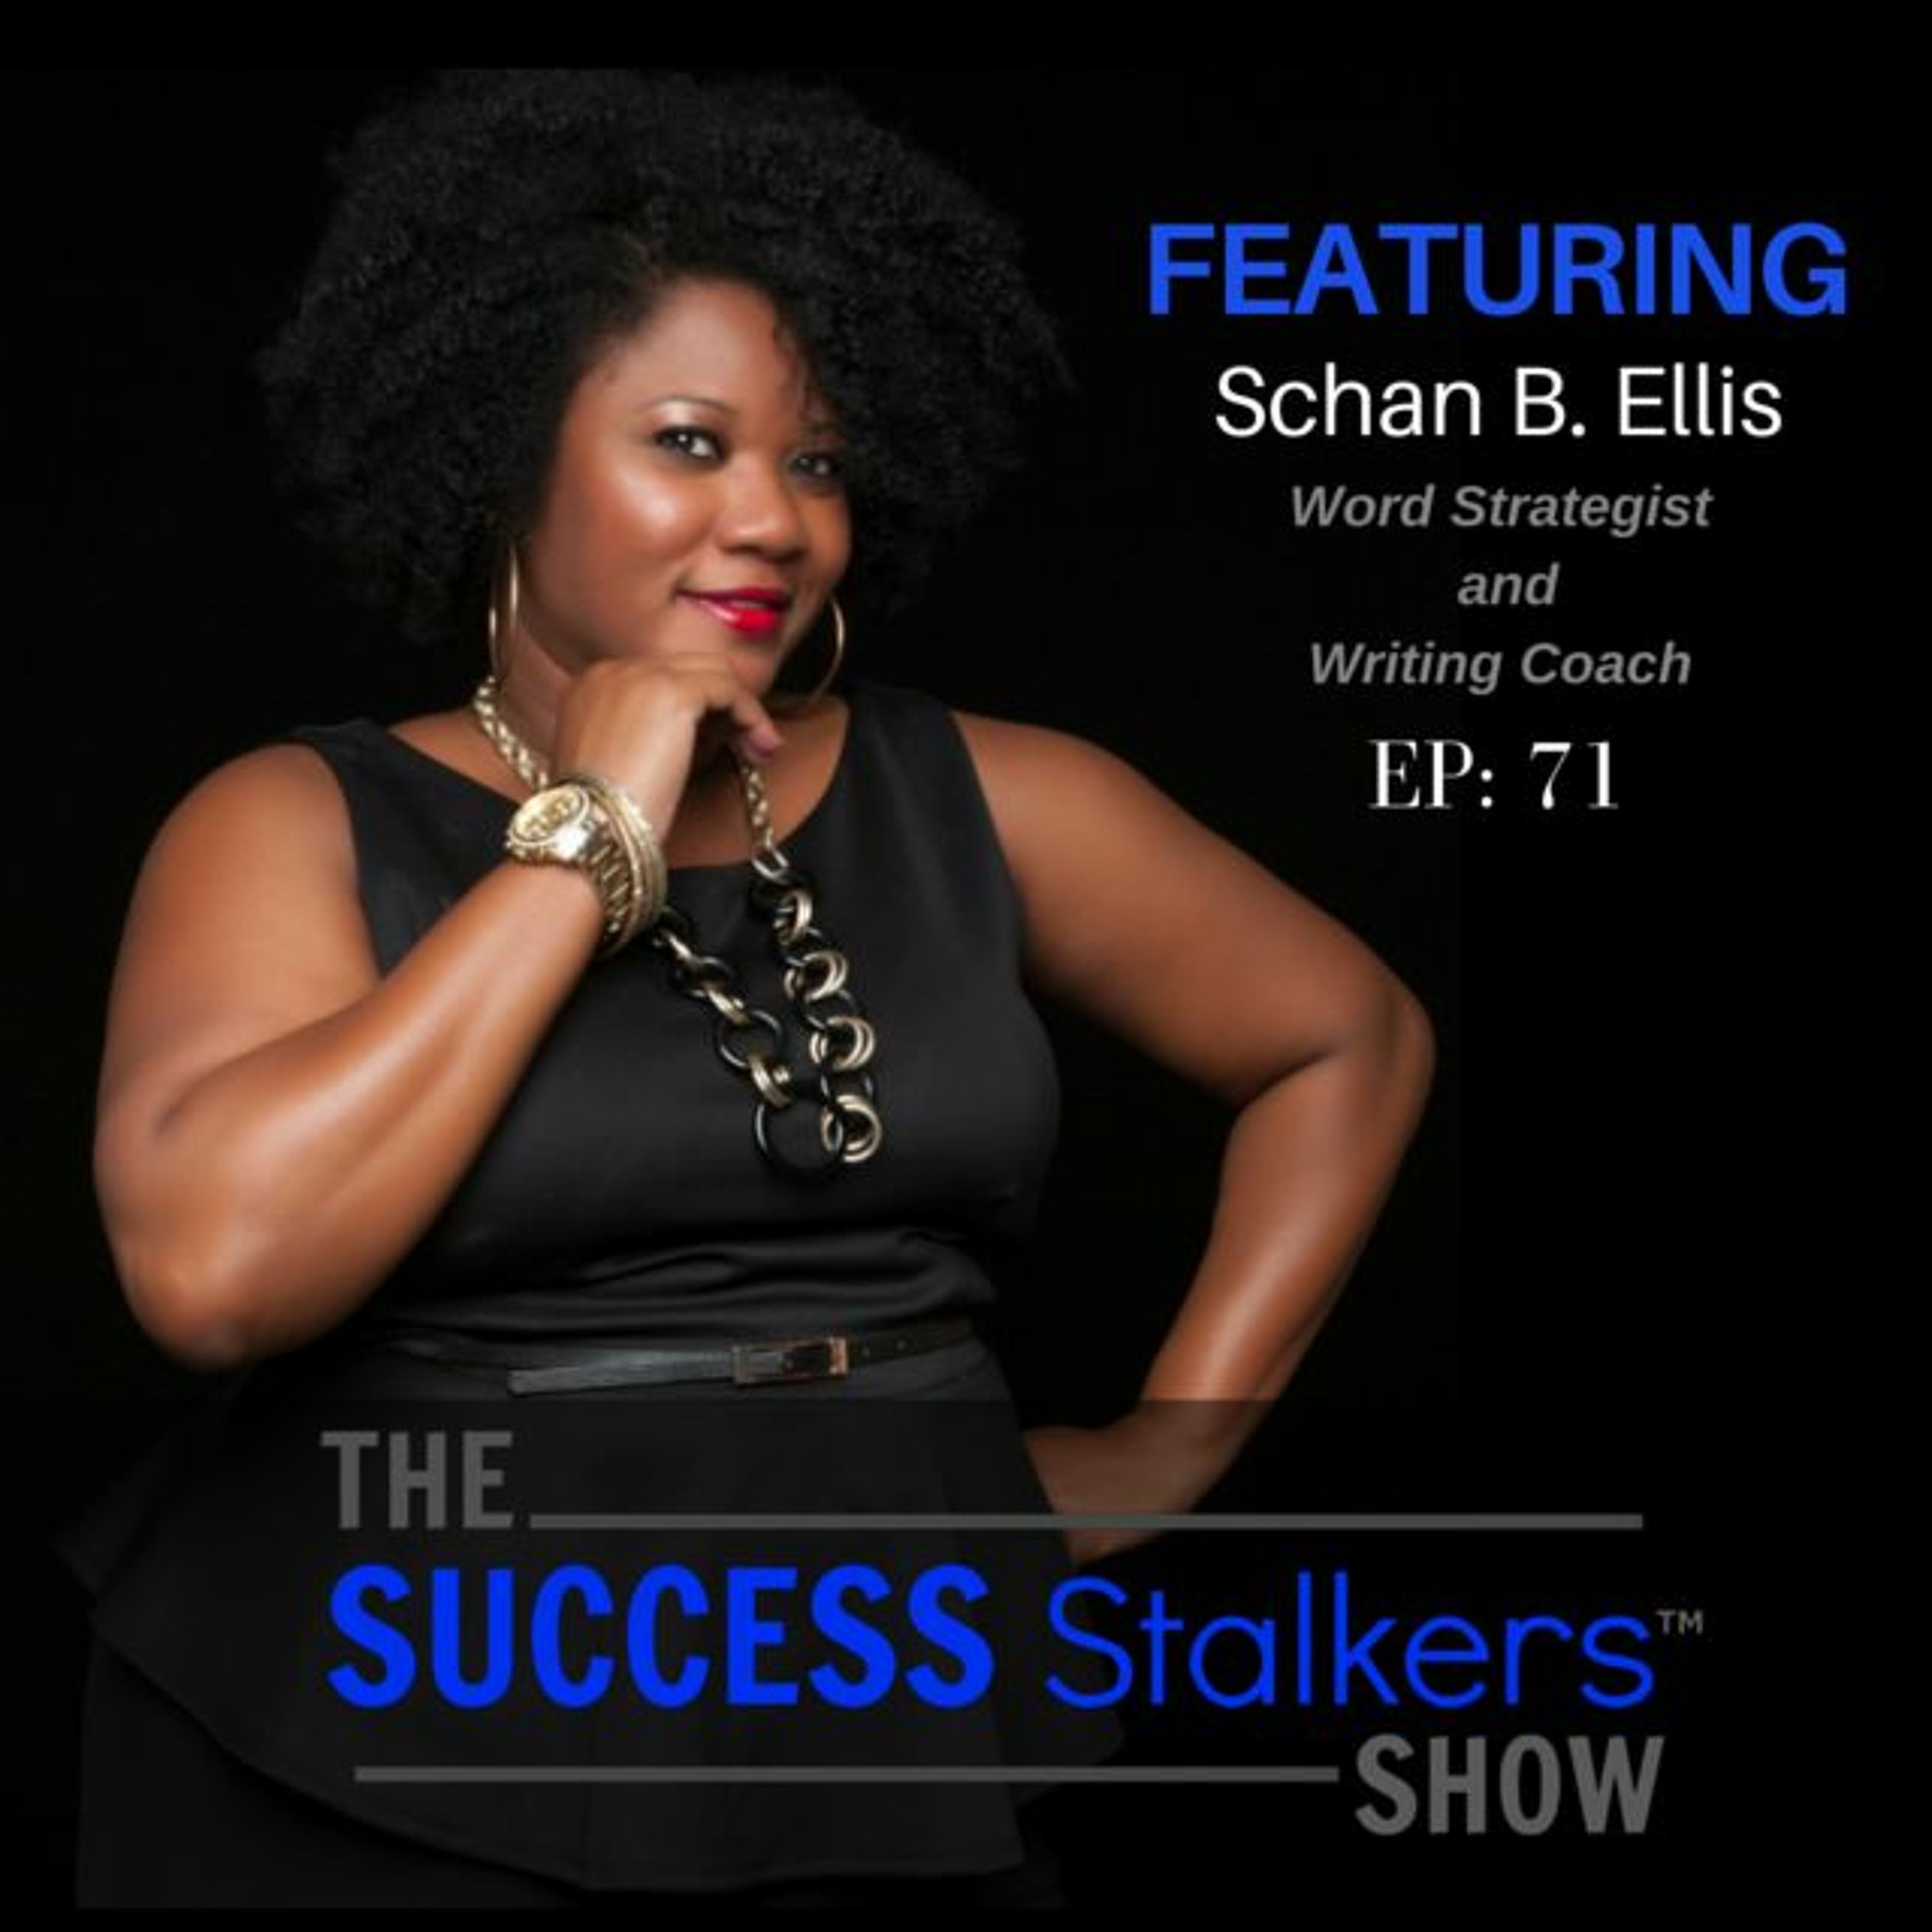 71: Word Strategist - Schan B. Ellis Shares How To Win With Words Image